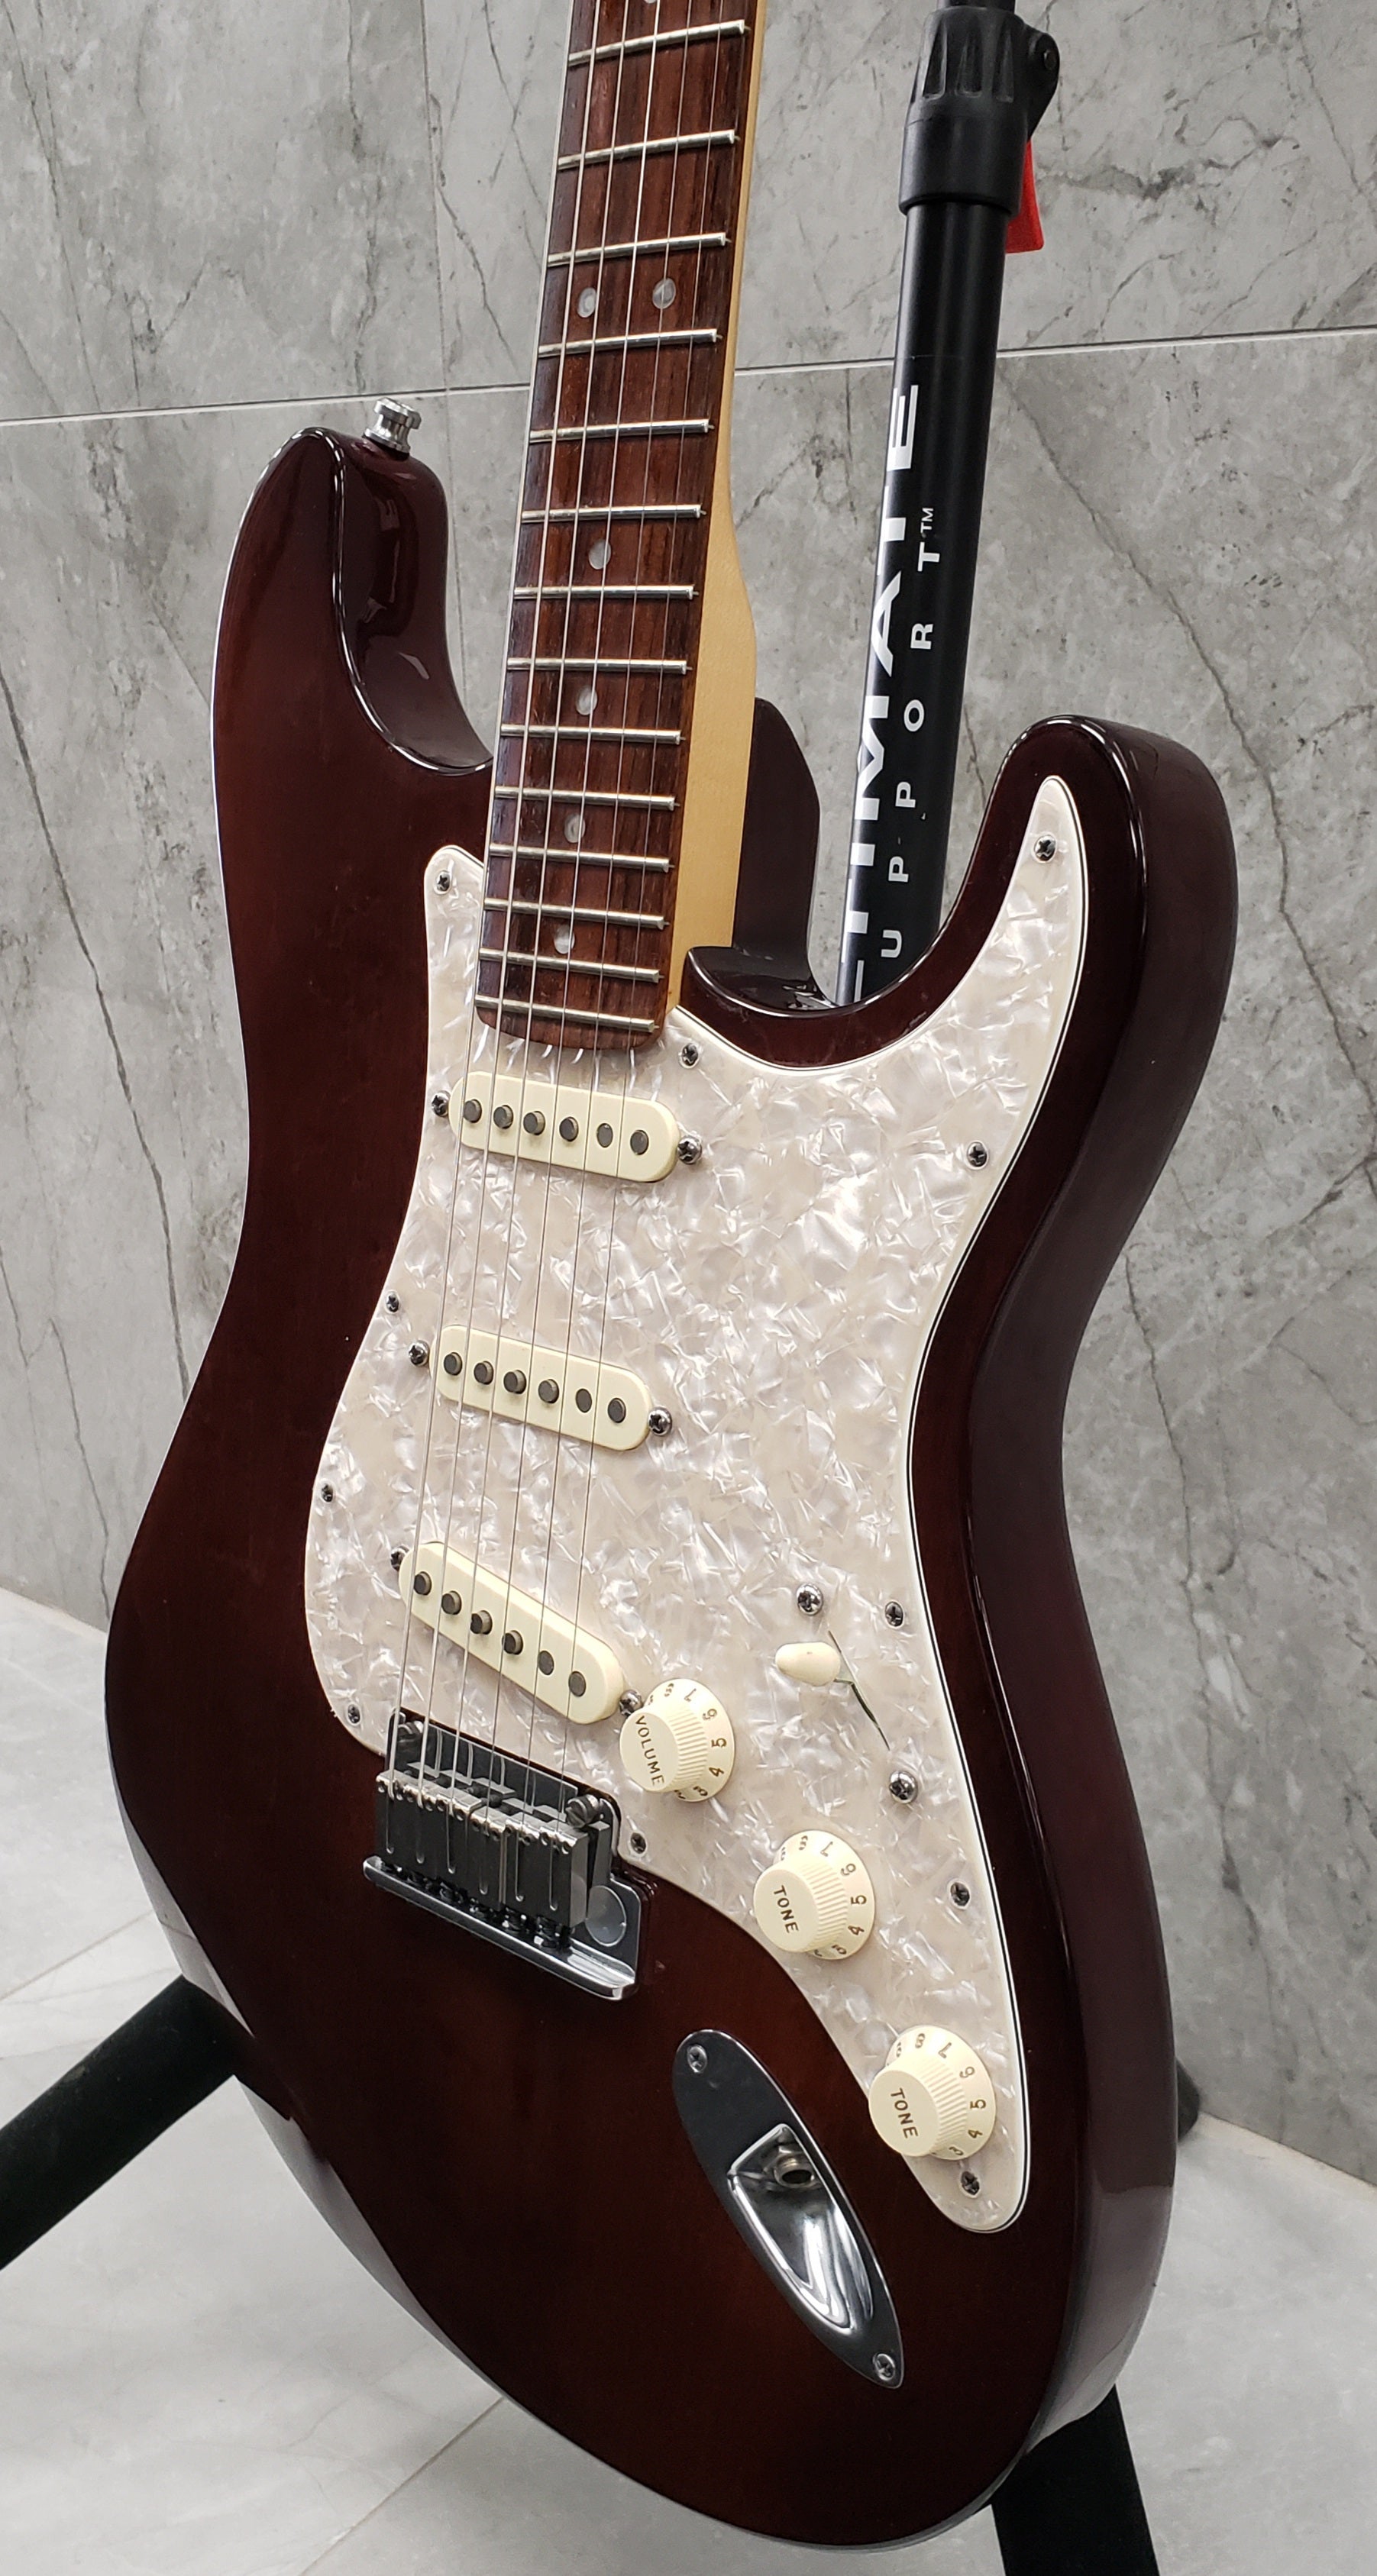 Fender American Design Stratocaster Rosewood Brown Stain 0181000060 SERIAL NUMBER US12316772 - 7.6 LBS